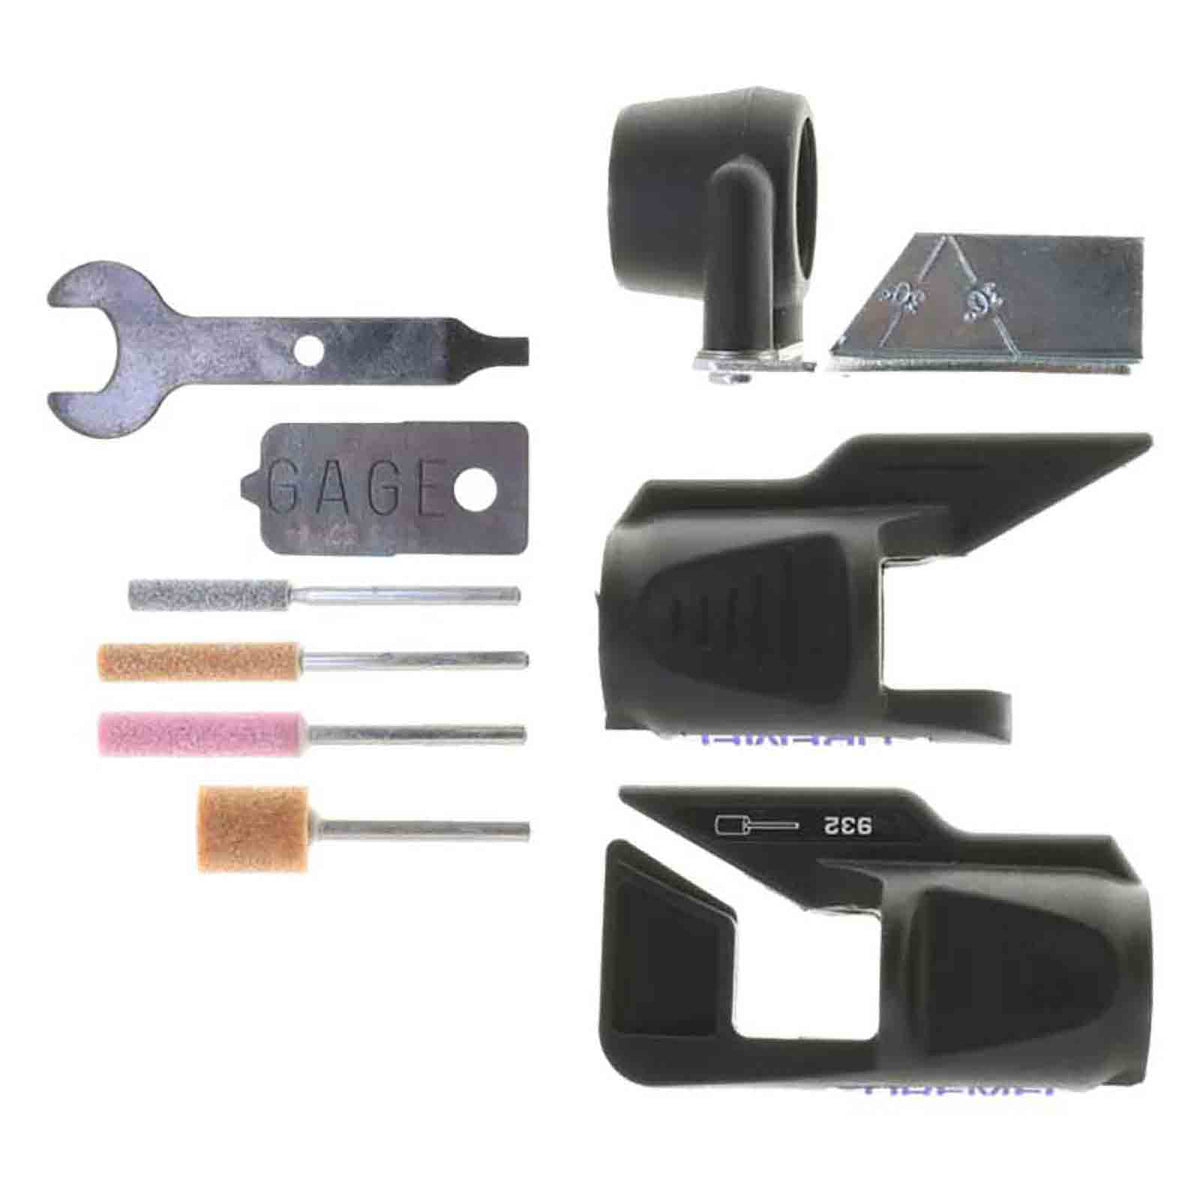 Dremel A679-03 Rotary Tool Sharpening Kit, 3 Attachments and 4 Accessories